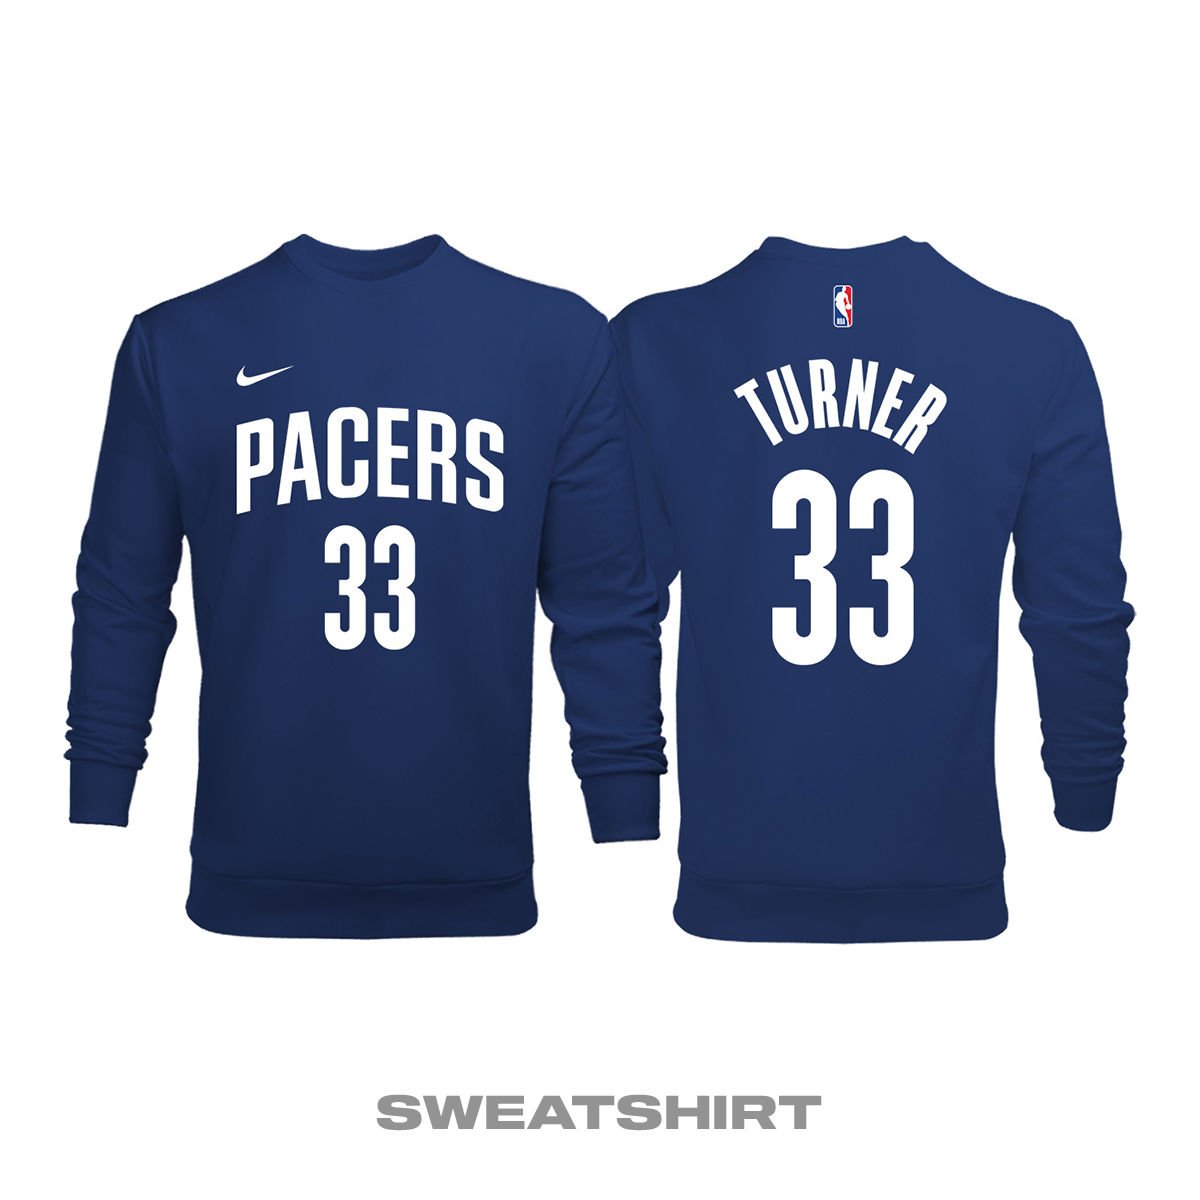 Indiana Pacers: City Edition 2022/2023 Sweatshirt